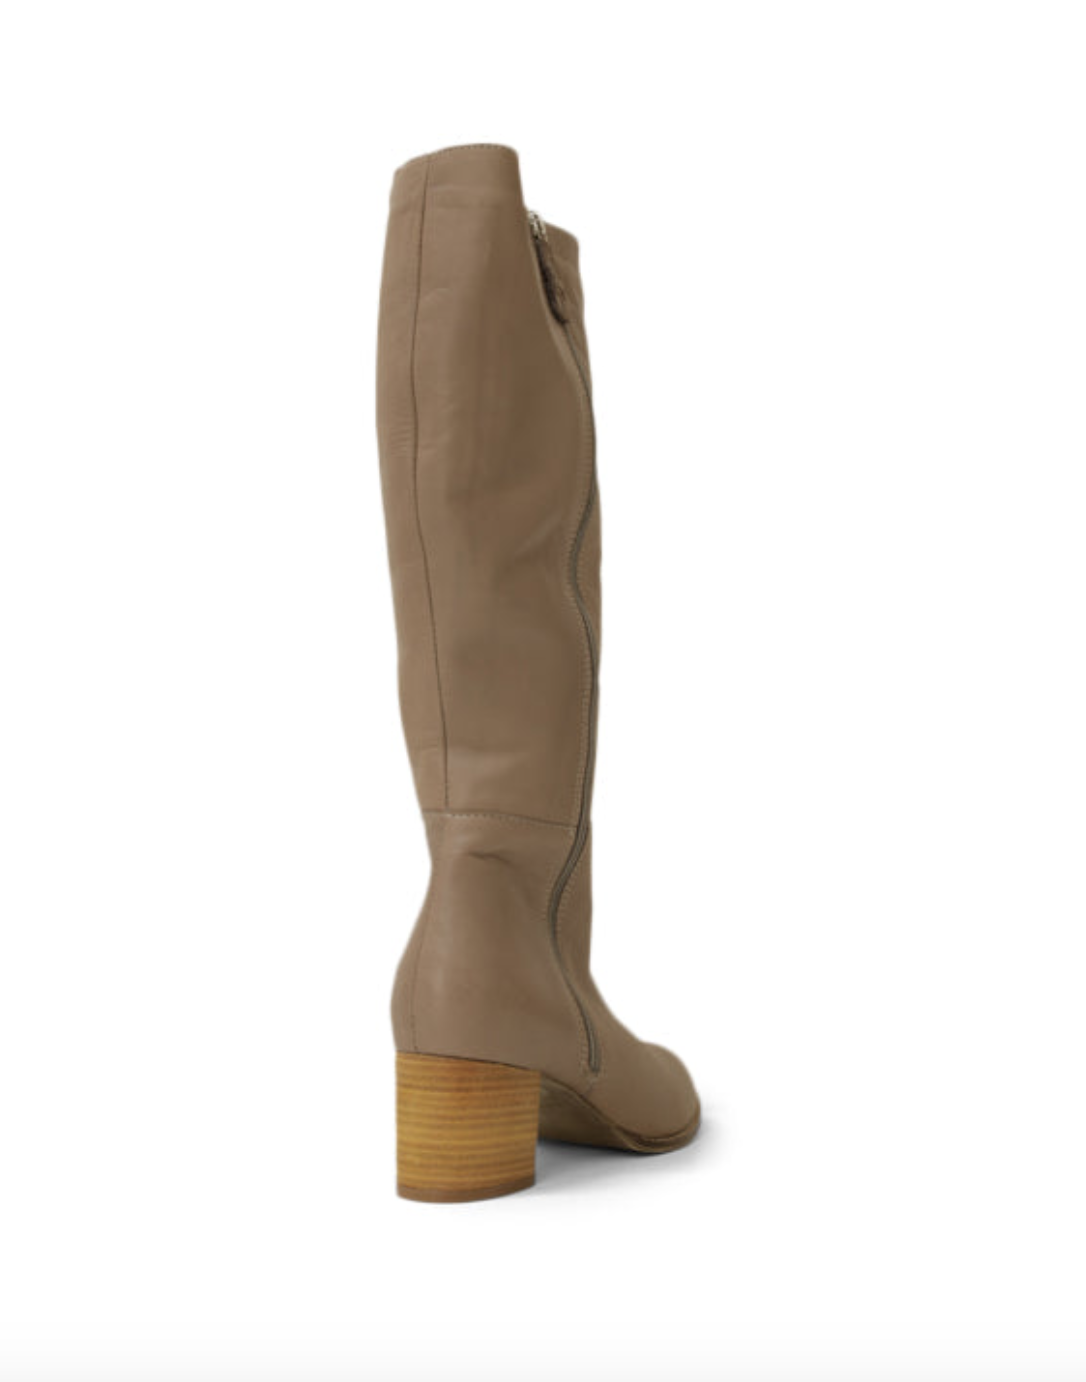 Bueno Emily Long Boots - beige knee high boots